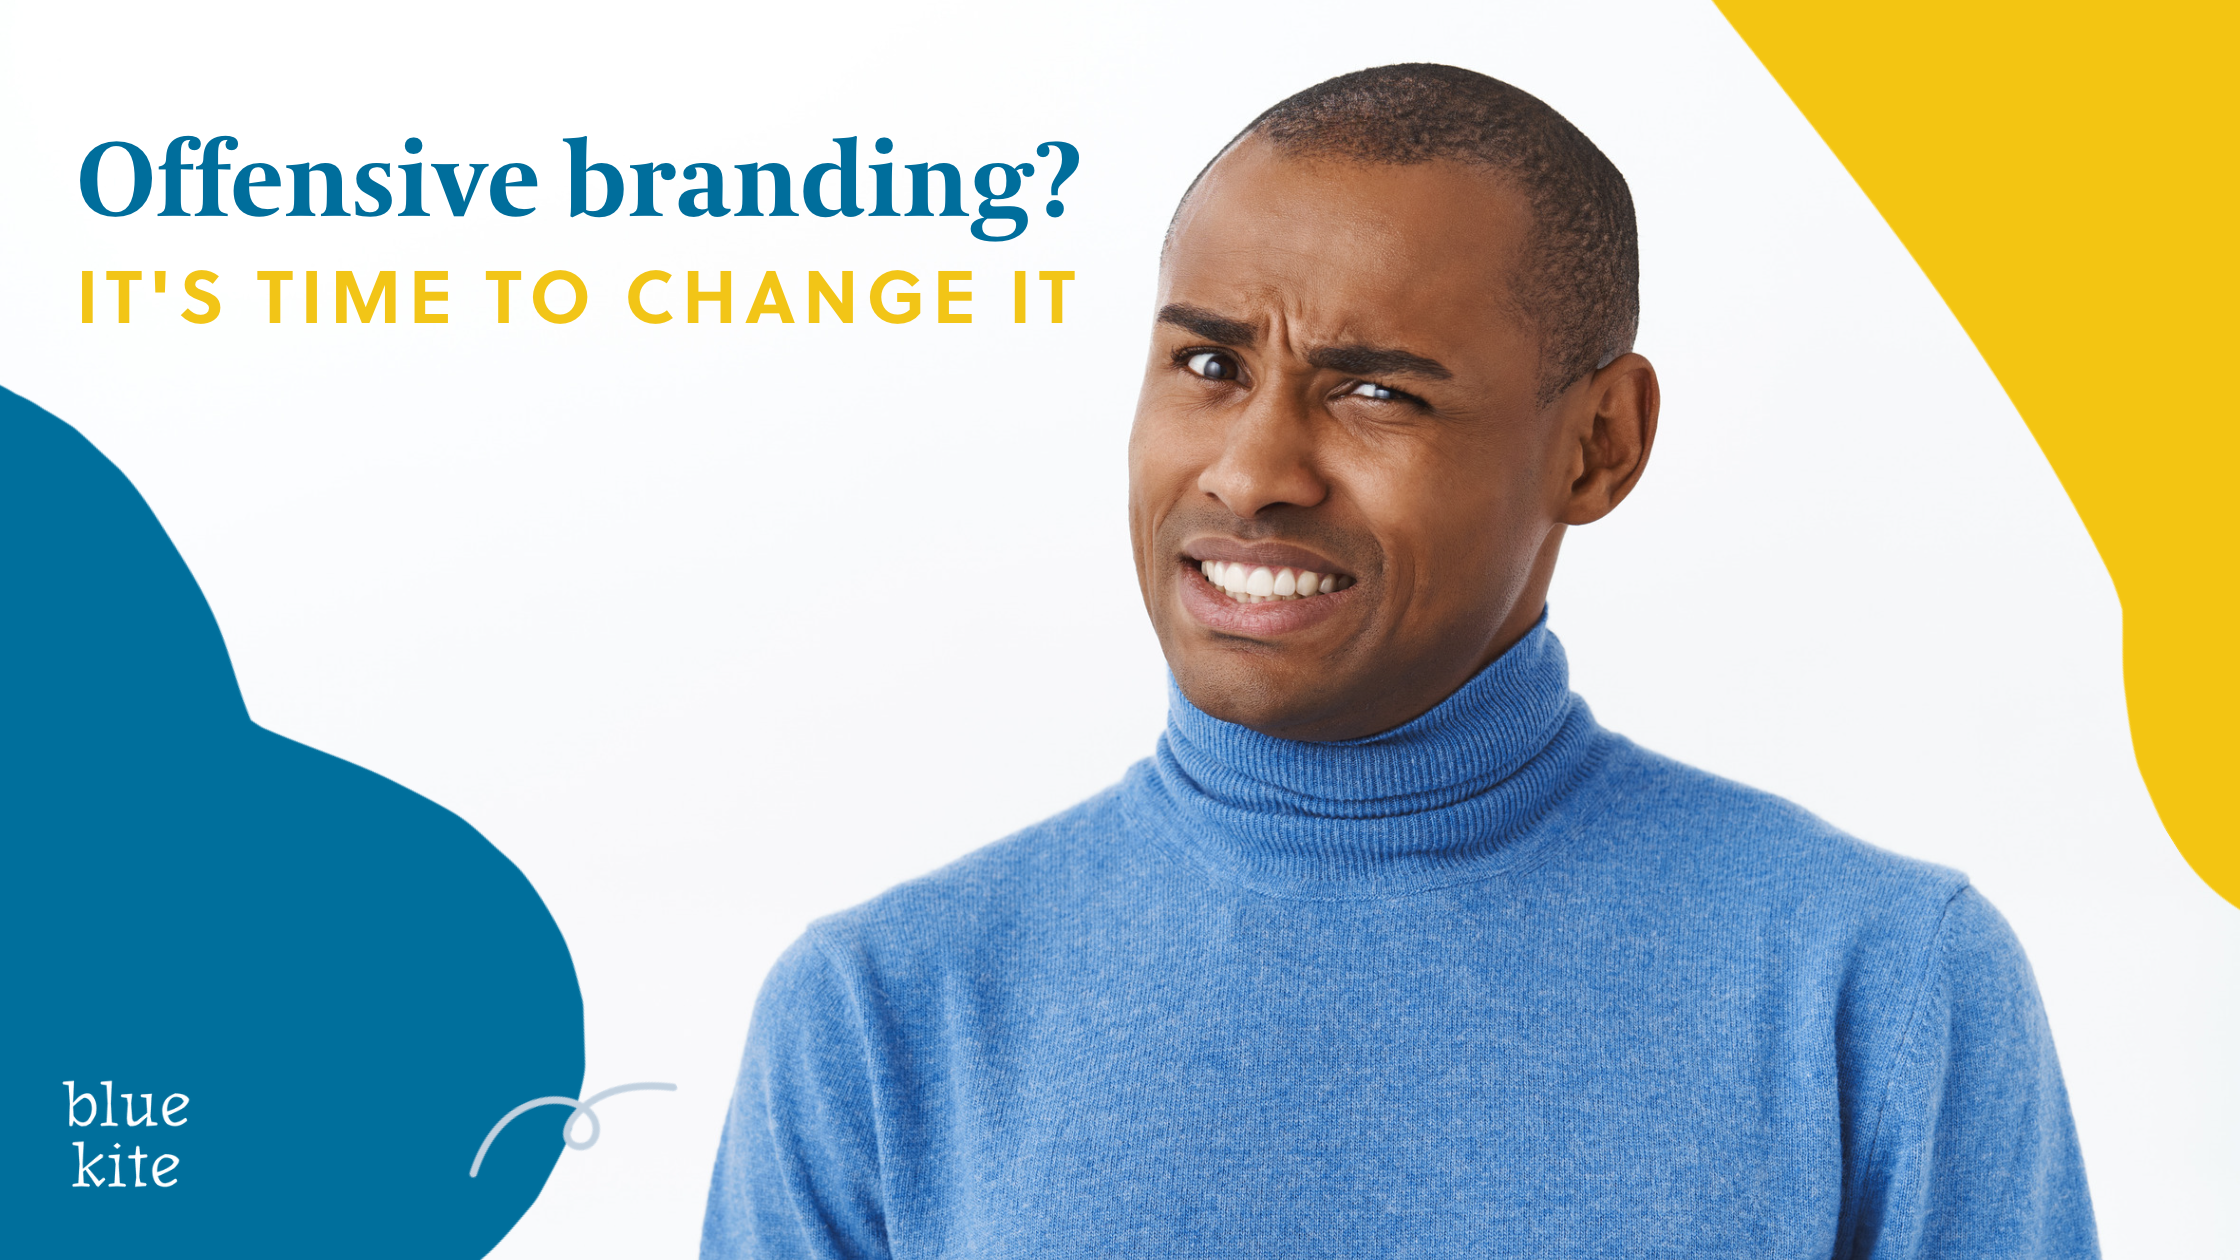 Do you have offensive branding? If so, it's time to change it.